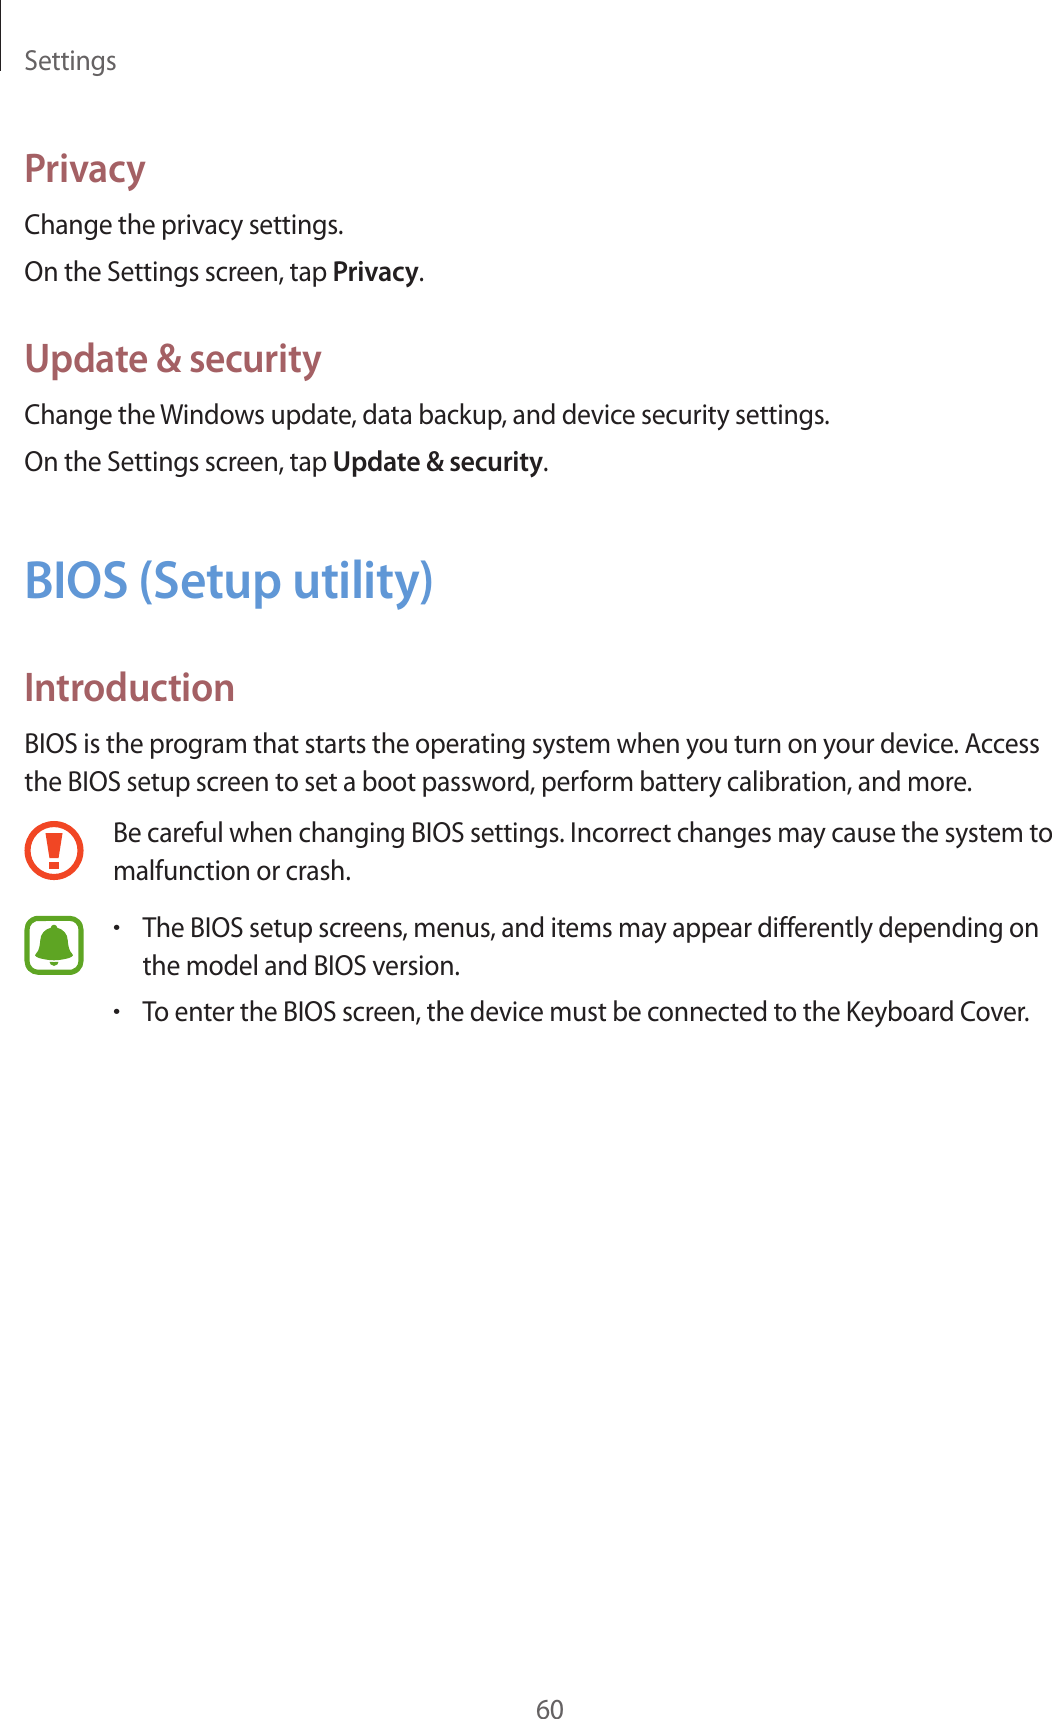 Settings60PrivacyChange the privacy settings.On the Settings screen, tap Privacy.Update &amp; securityChange the Windows update, data backup, and device security settings.On the Settings screen, tap Update &amp; security.BIOS (Setup utility)IntroductionBIOS is the program that starts the operating system when you turn on your device. Access the BIOS setup screen to set a boot password, perform battery calibration, and more.Be careful when changing BIOS settings. Incorrect changes may cause the system to malfunction or crash.•The BIOS setup screens, menus, and items may appear differently depending on the model and BIOS version.•To enter the BIOS screen, the device must be connected to the Keyboard Cover.